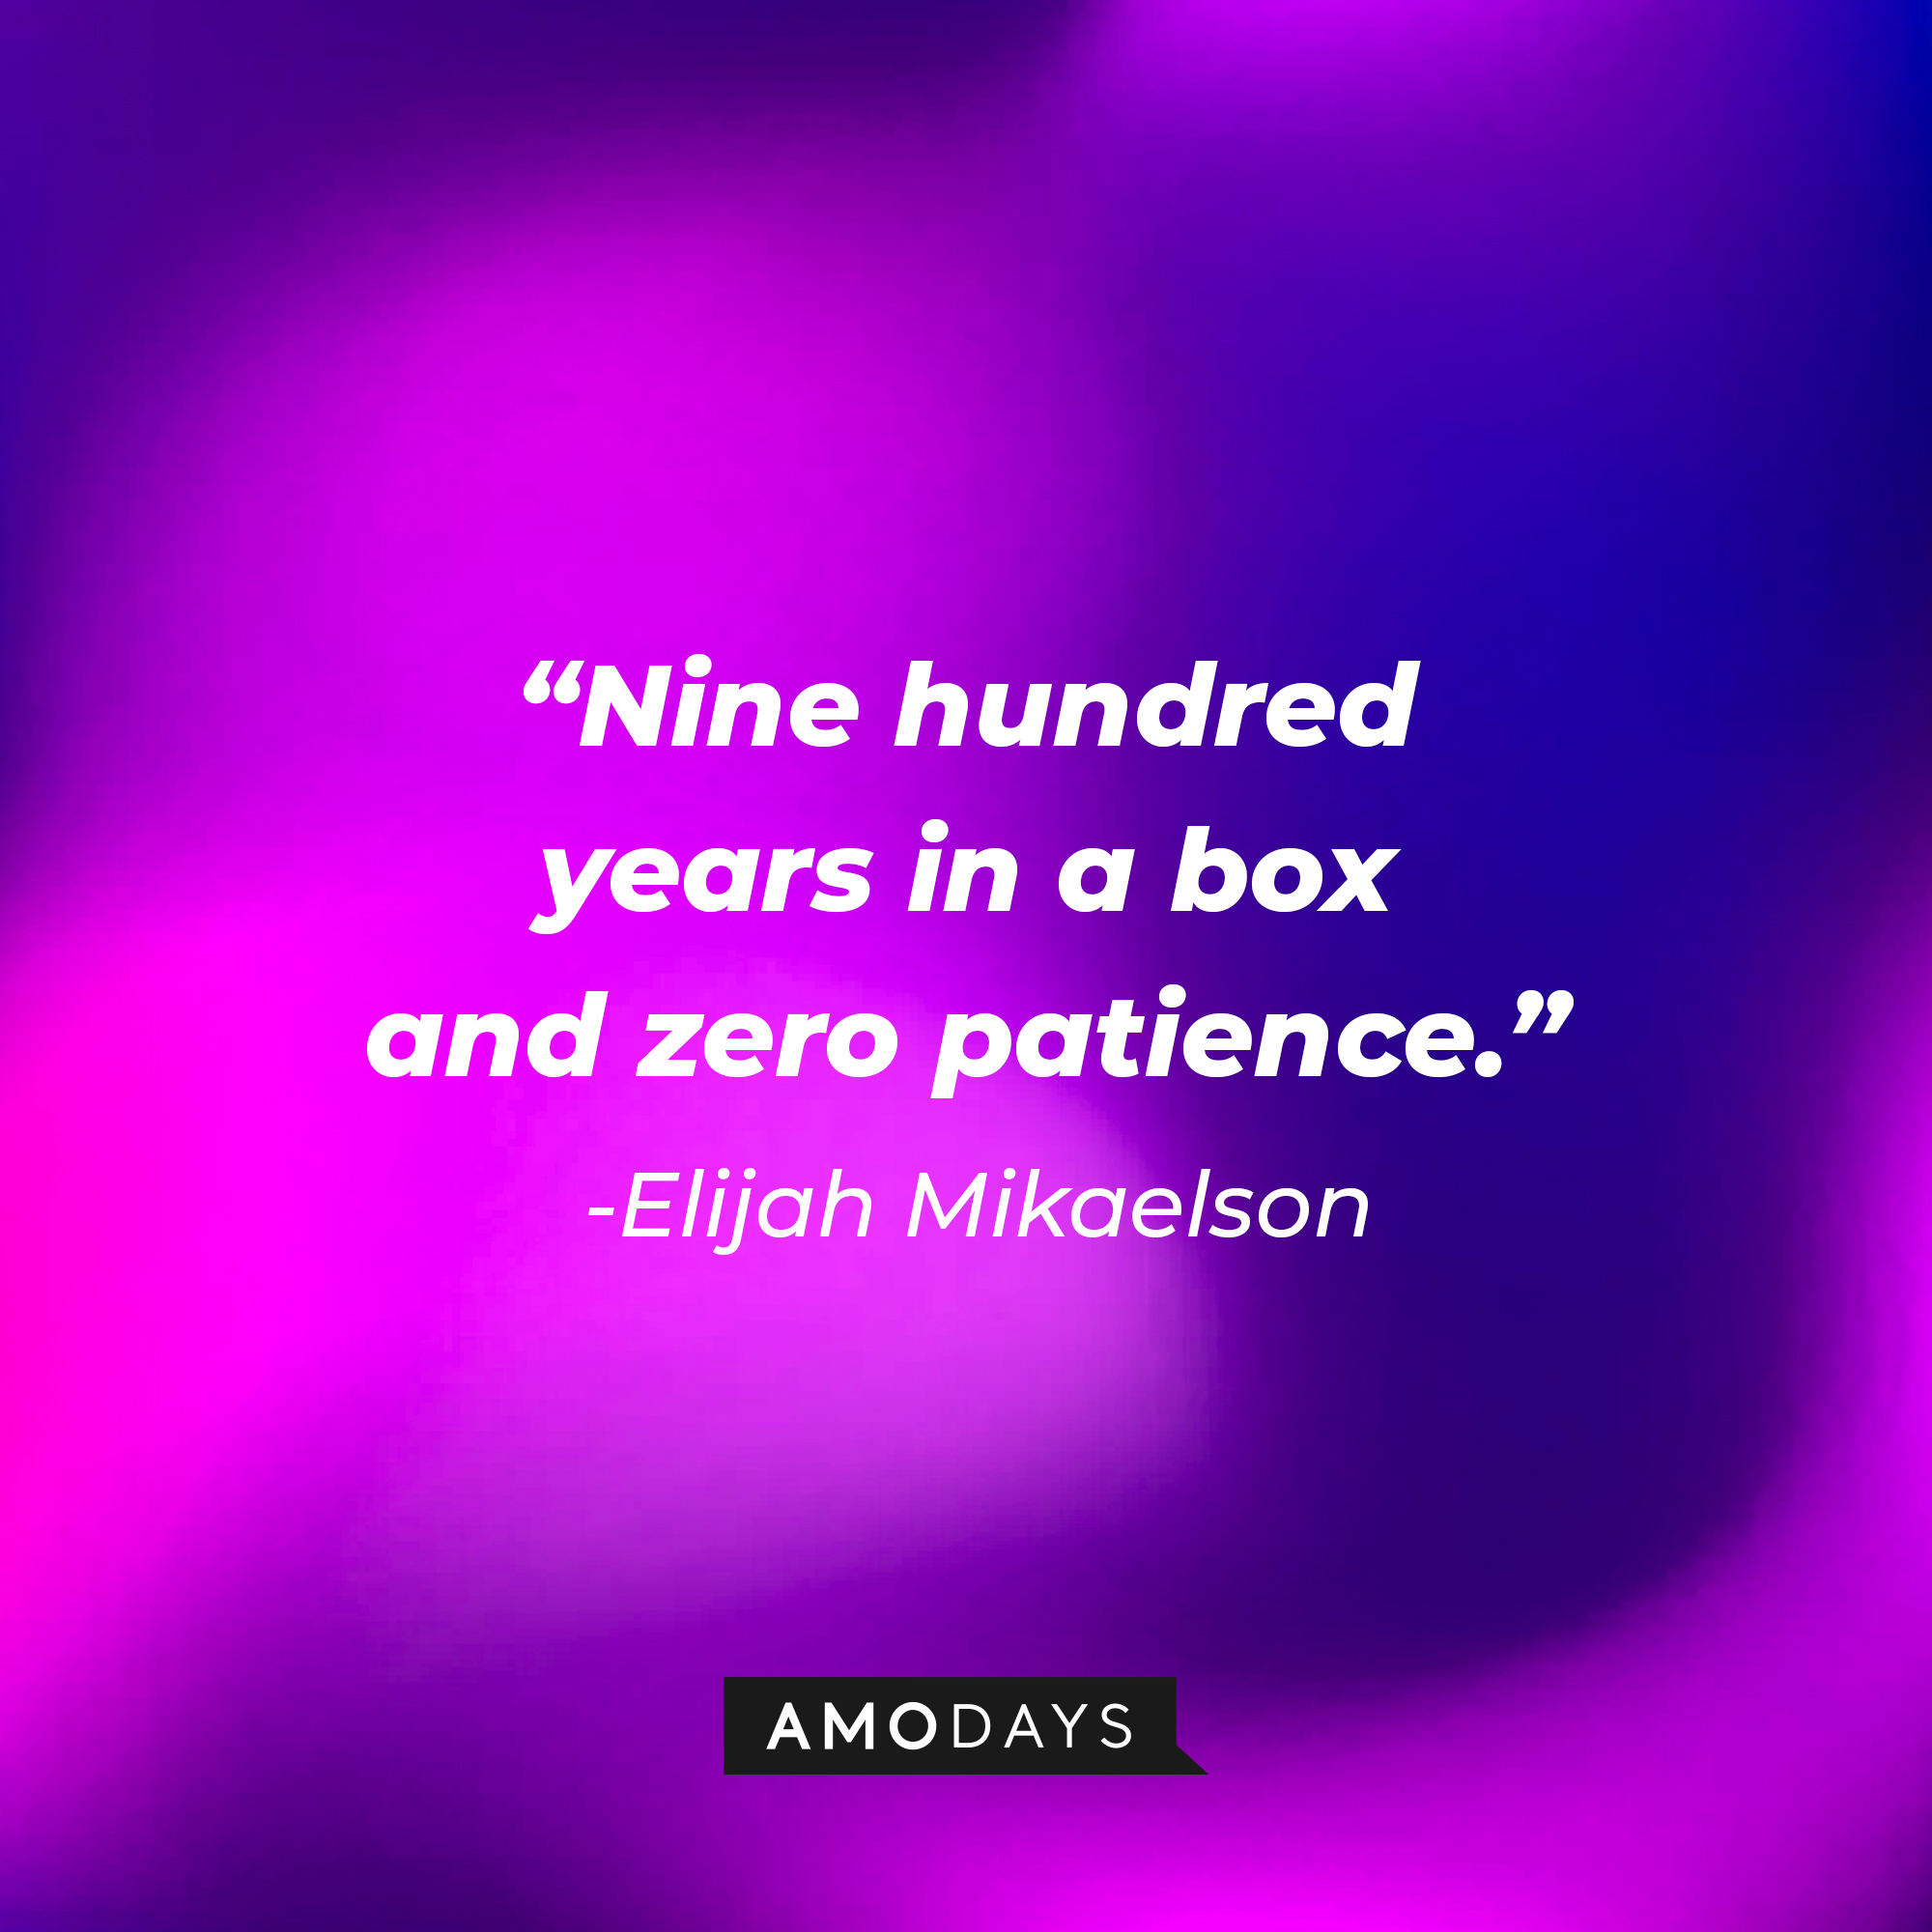 Elijah Mikaelson's quote: "Nine hundred years in a box and zero patience." | Source: facebook.com/thevampirediaries